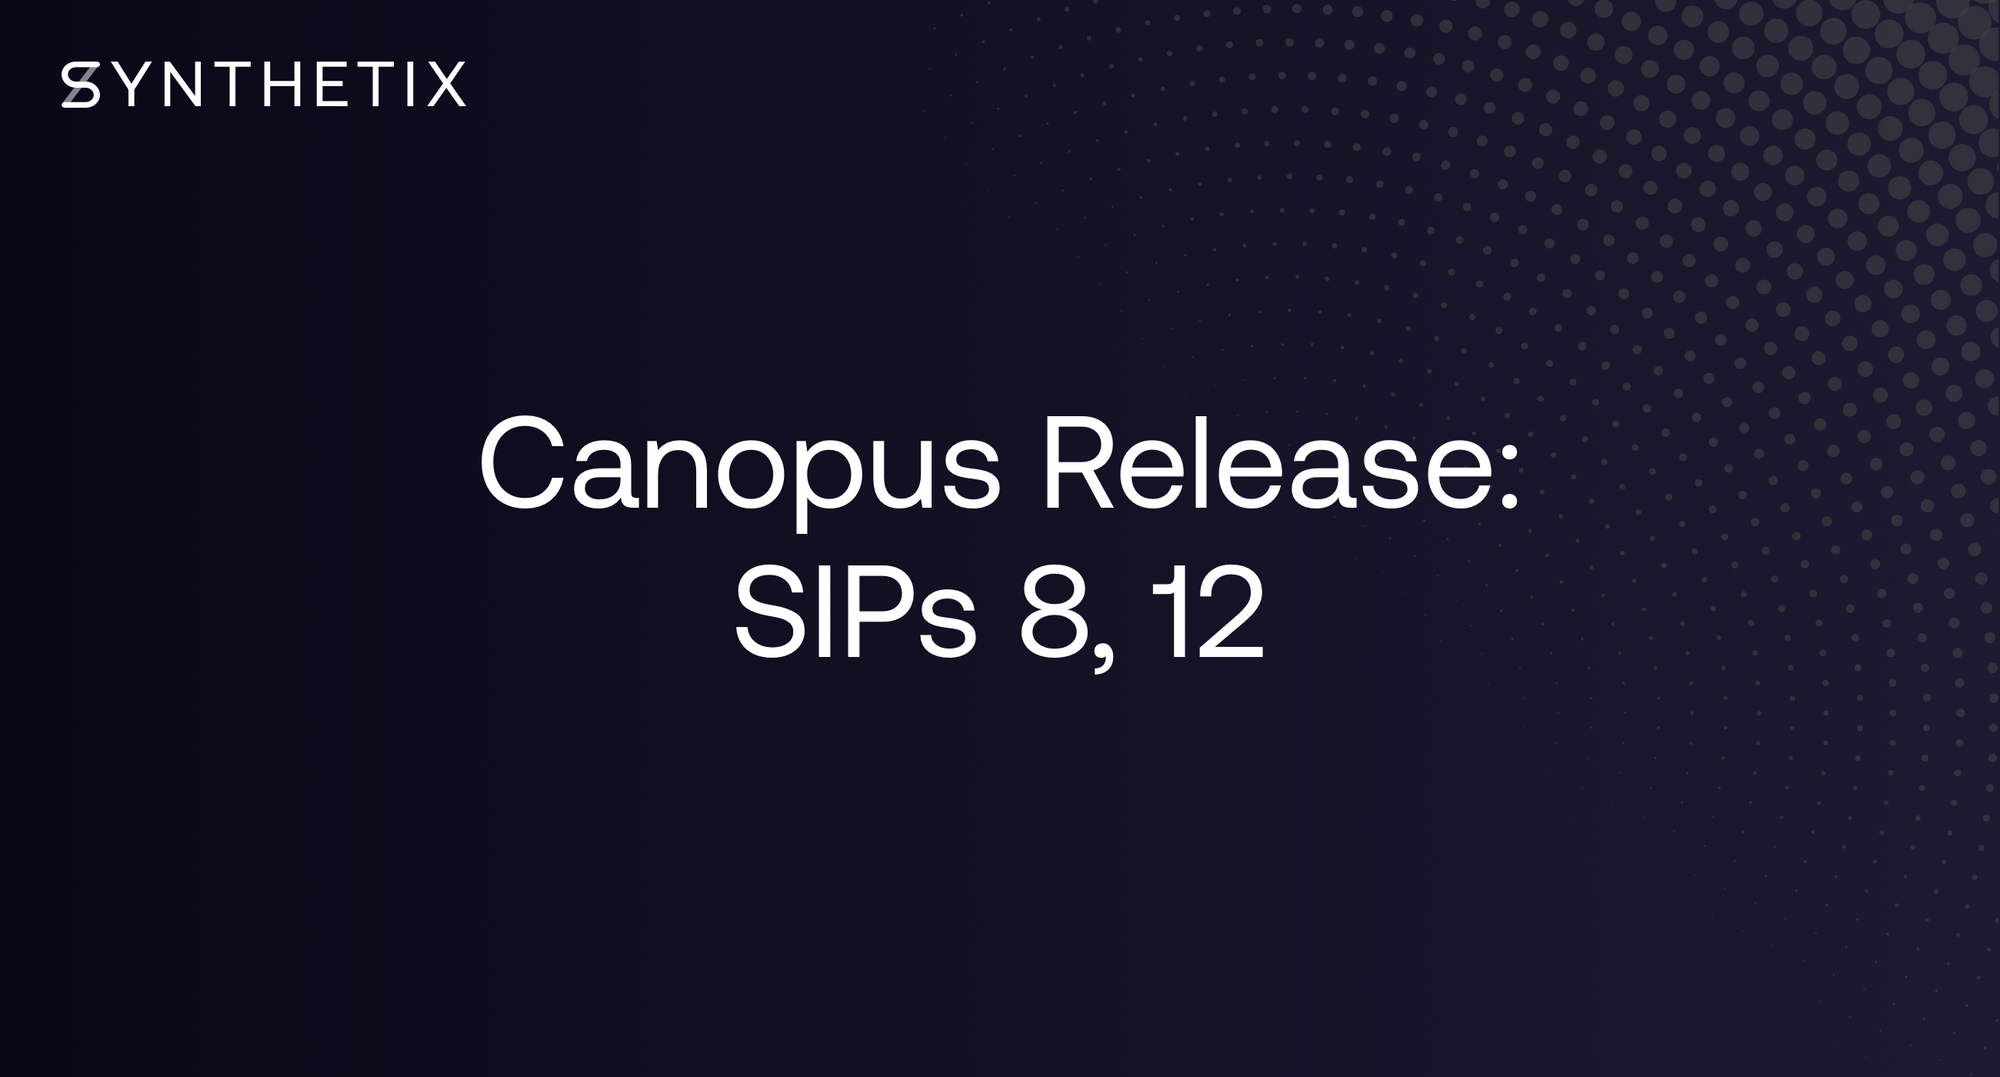 The Canopus Release